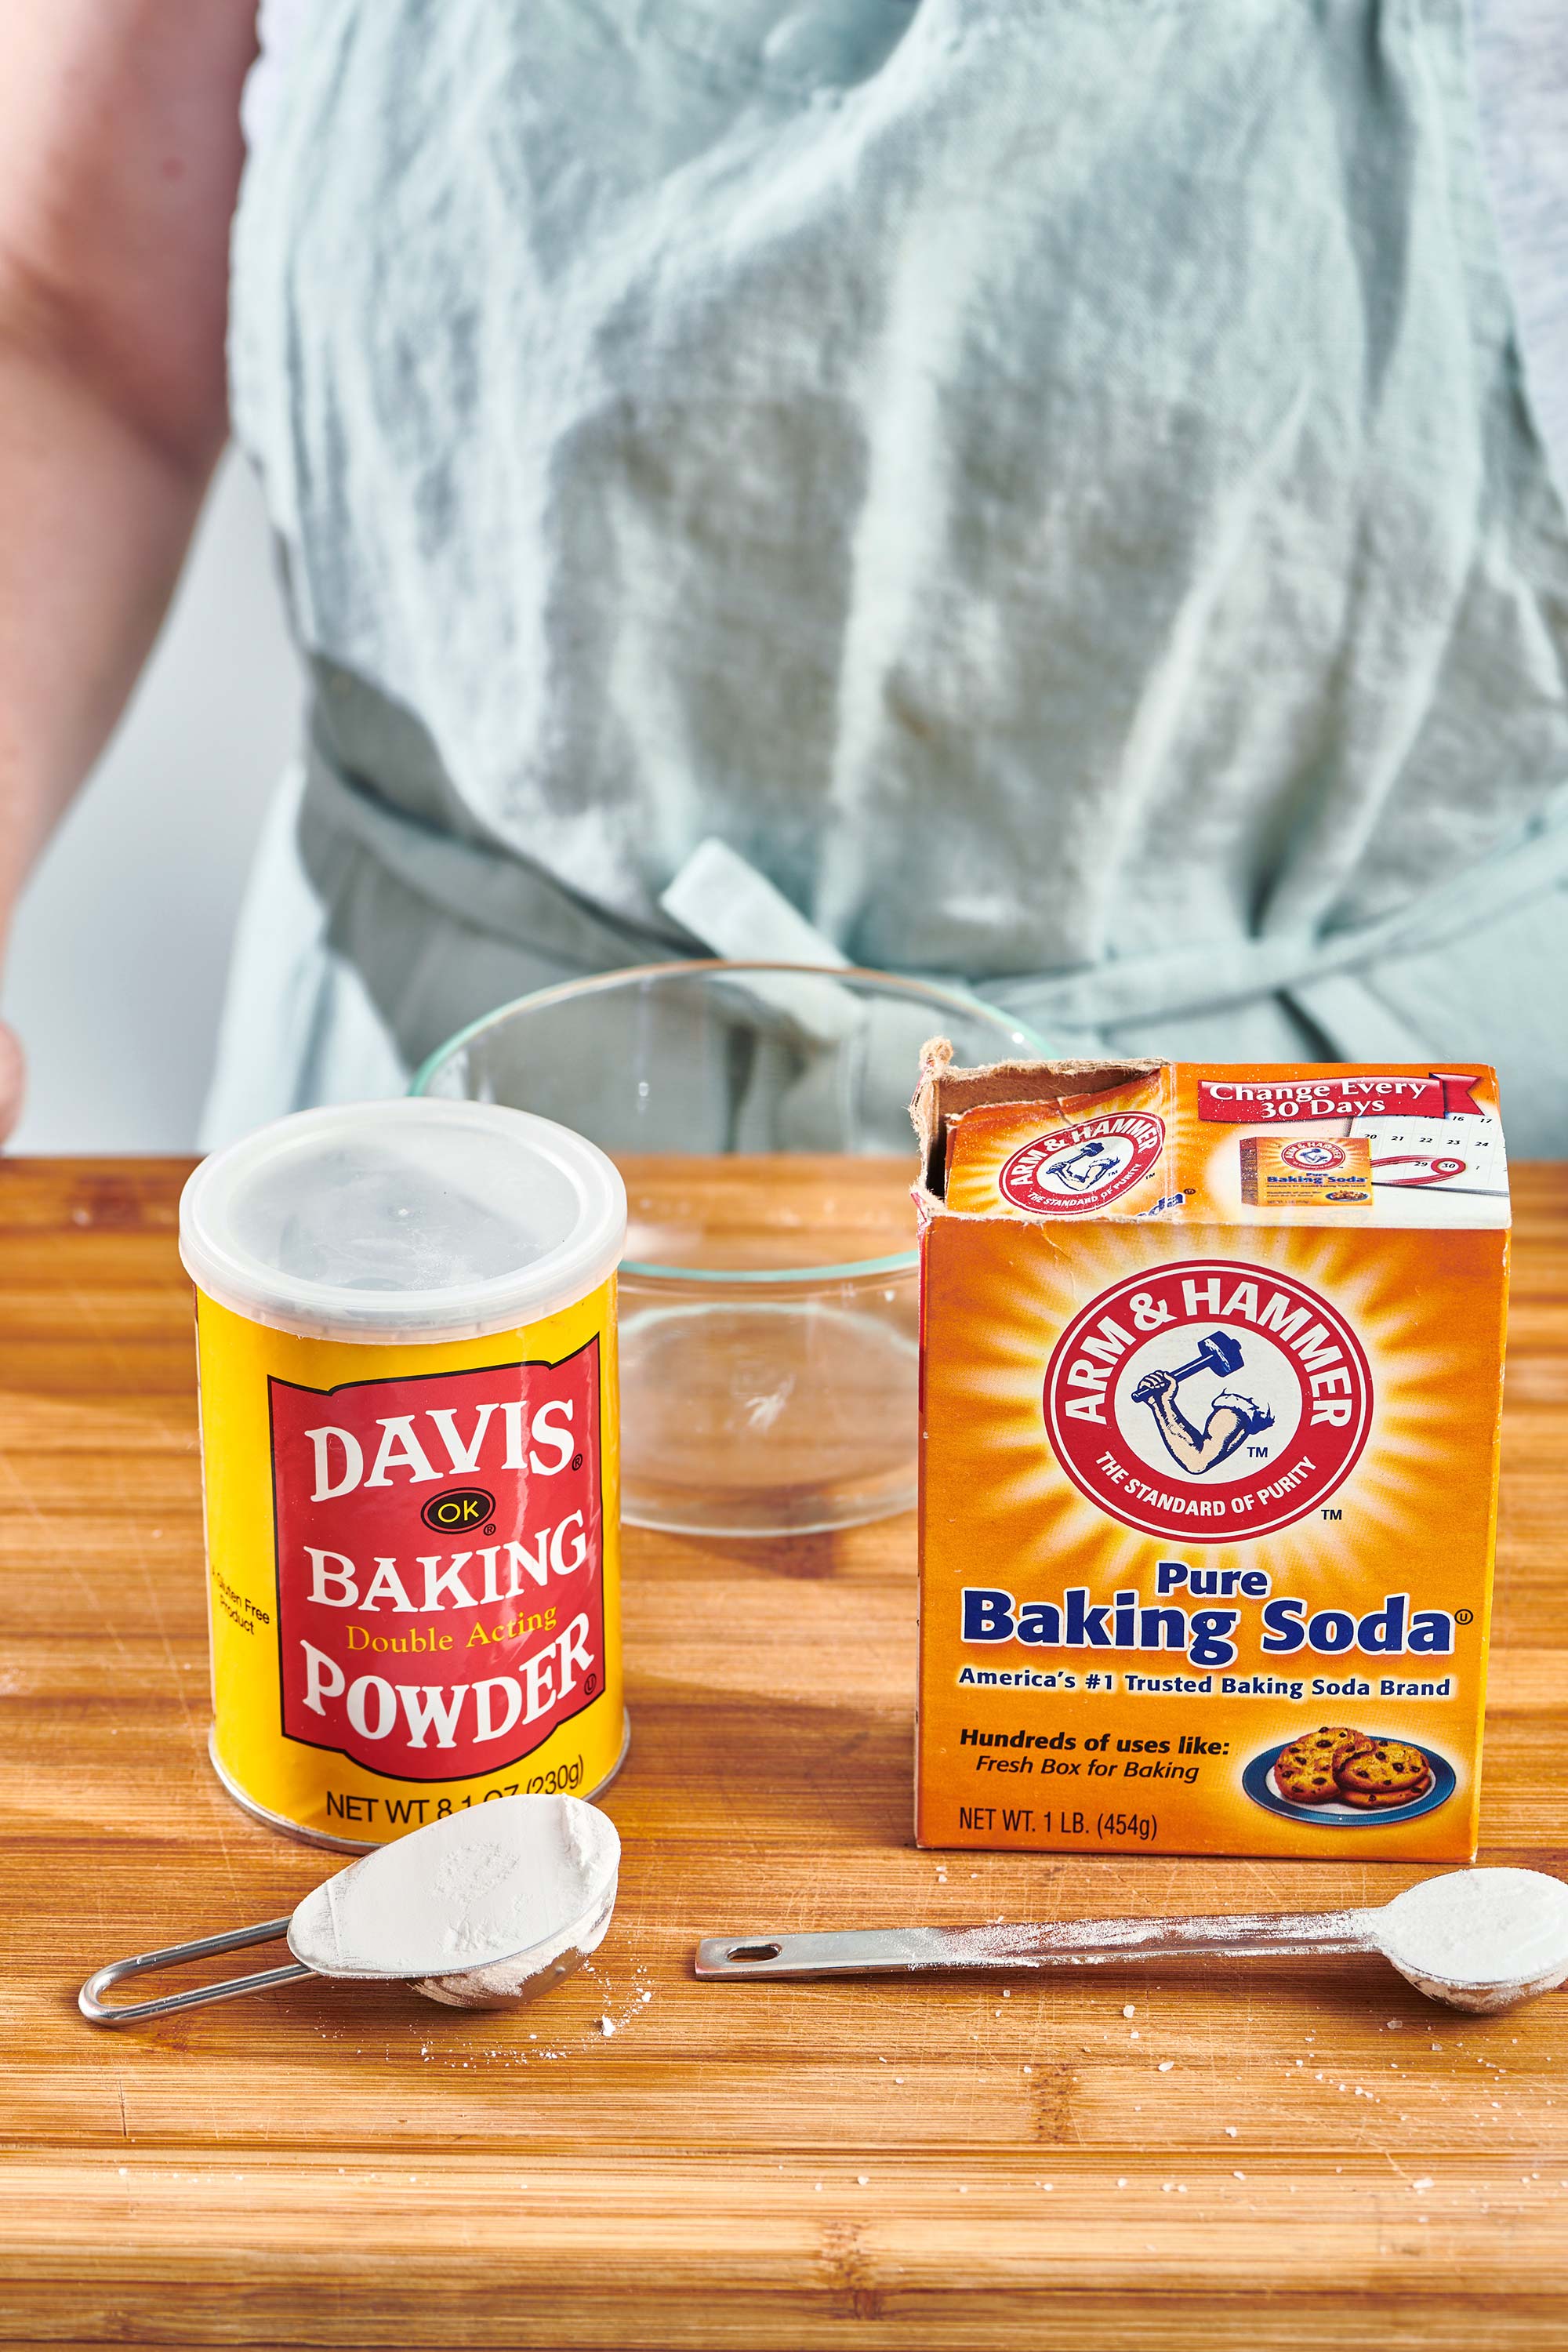 Woman standing behind packages of baking powder and baking soda on a counter.